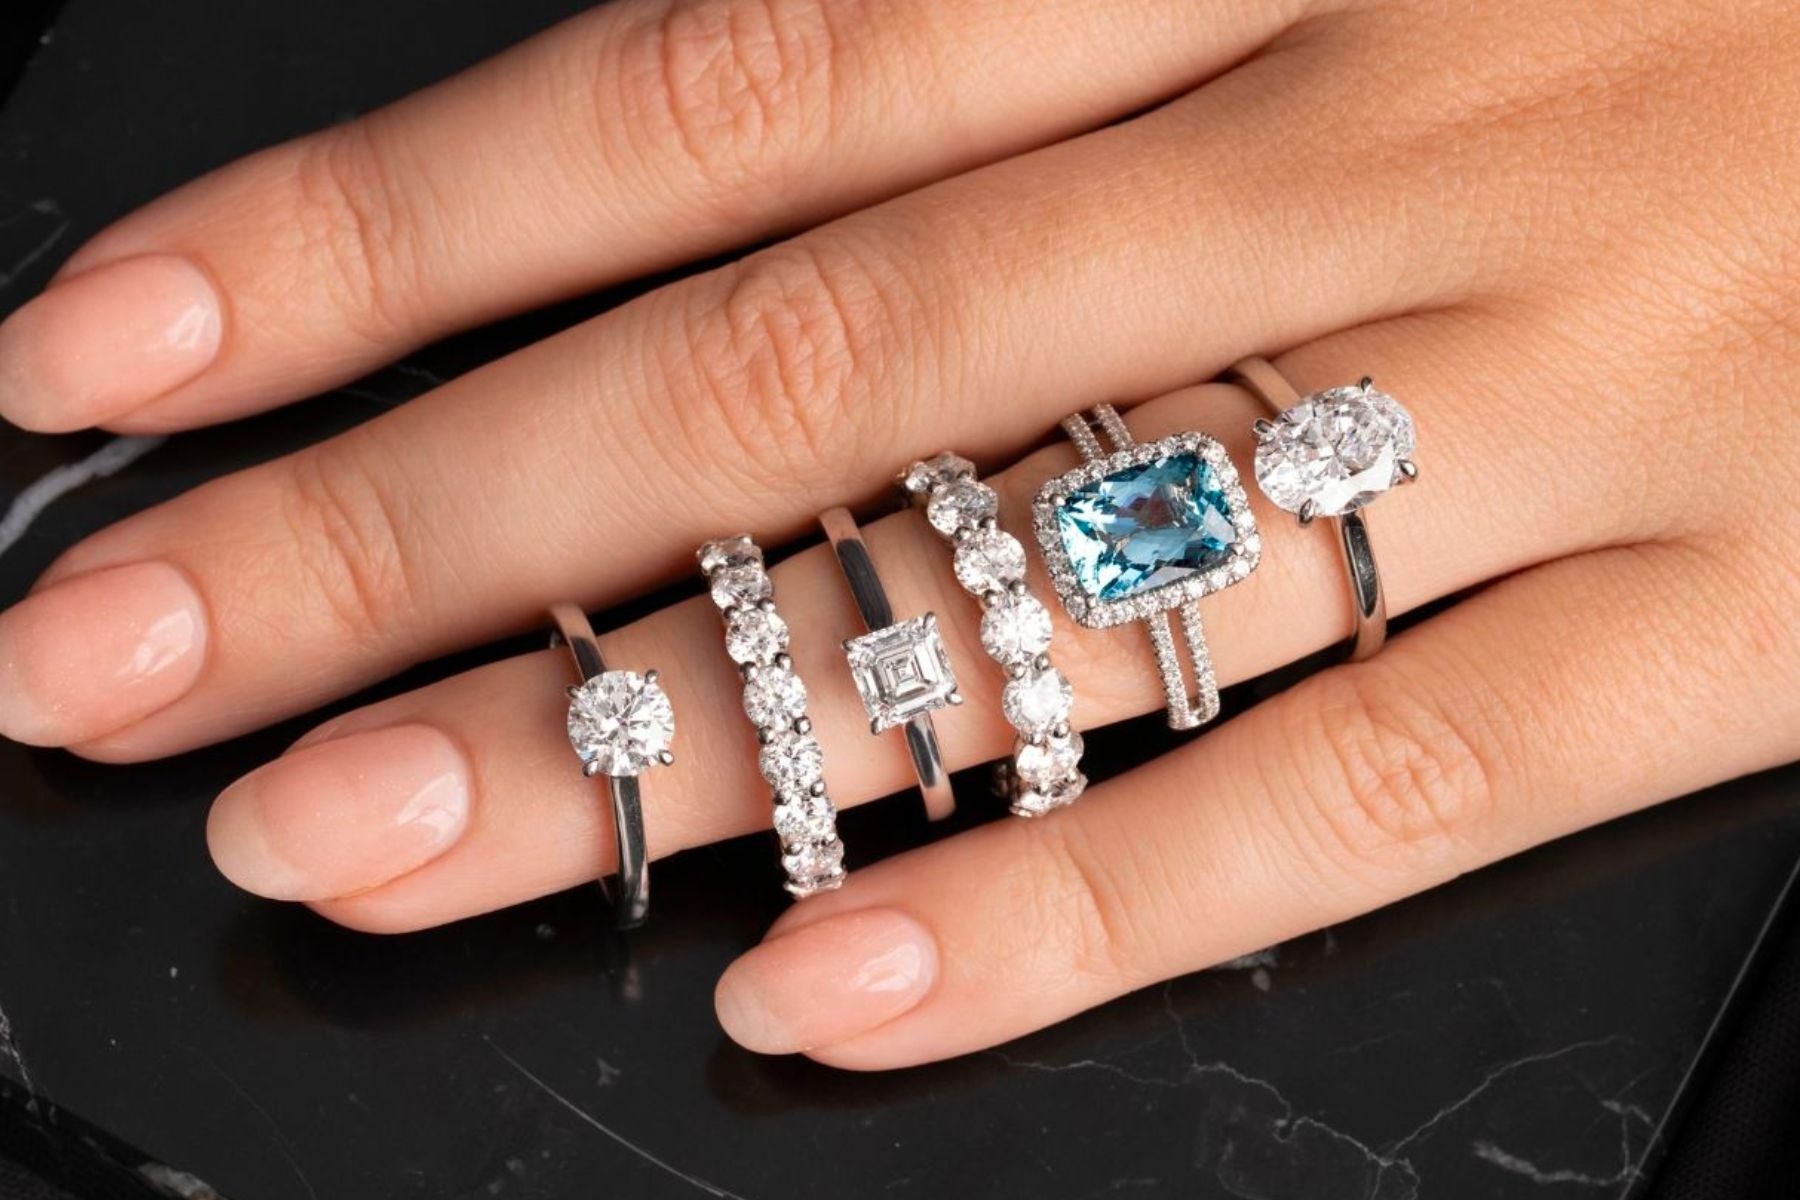 Engagement rings and jewellery; What is trending for 2022?